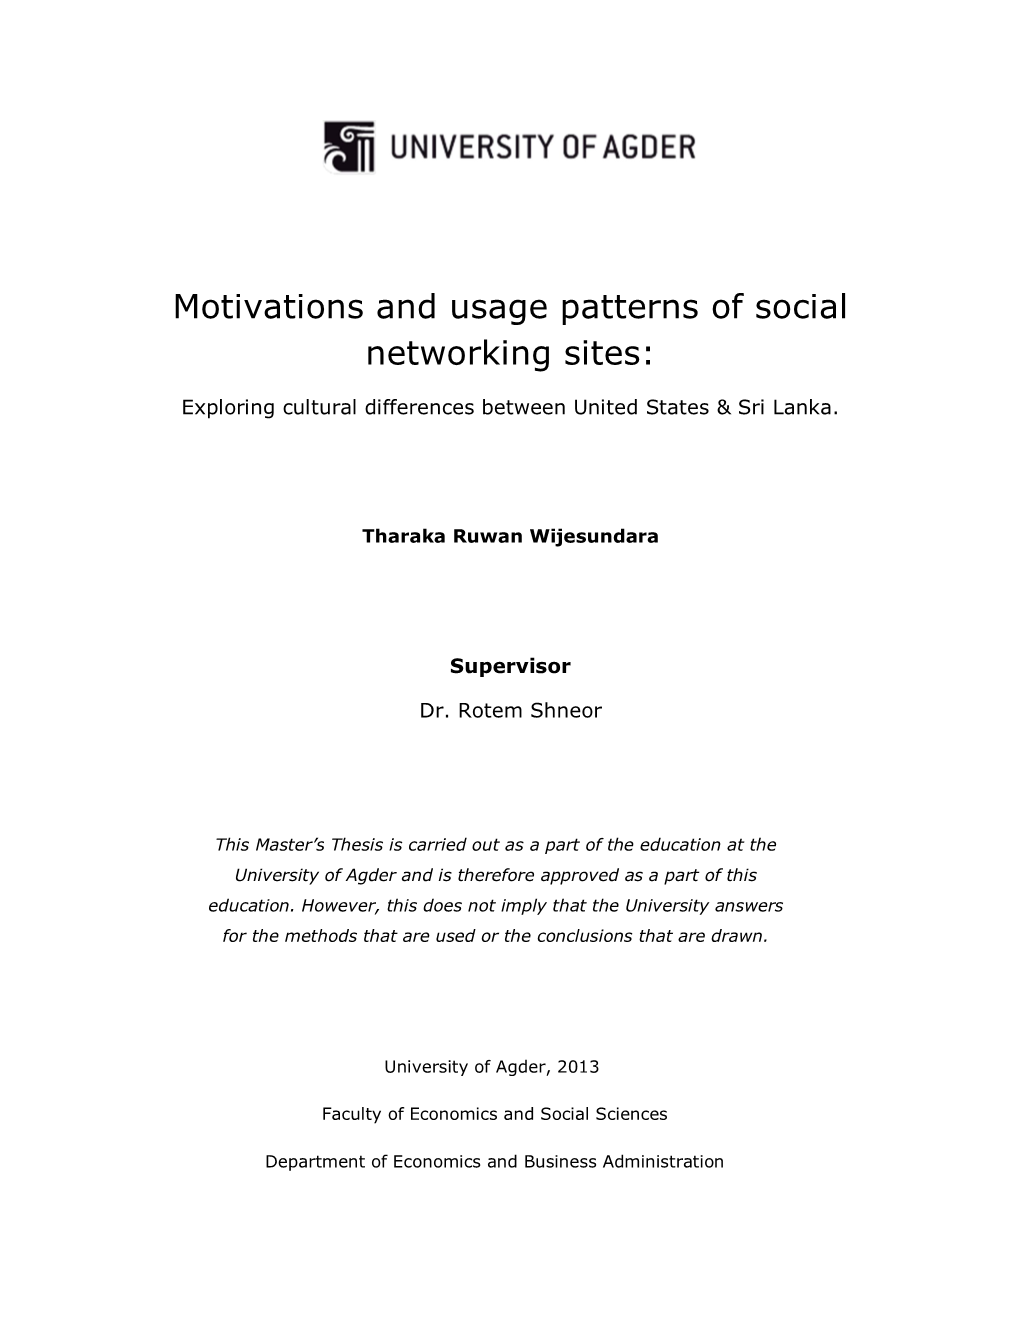 Motivations and Usage Patterns of Social Networking Sites